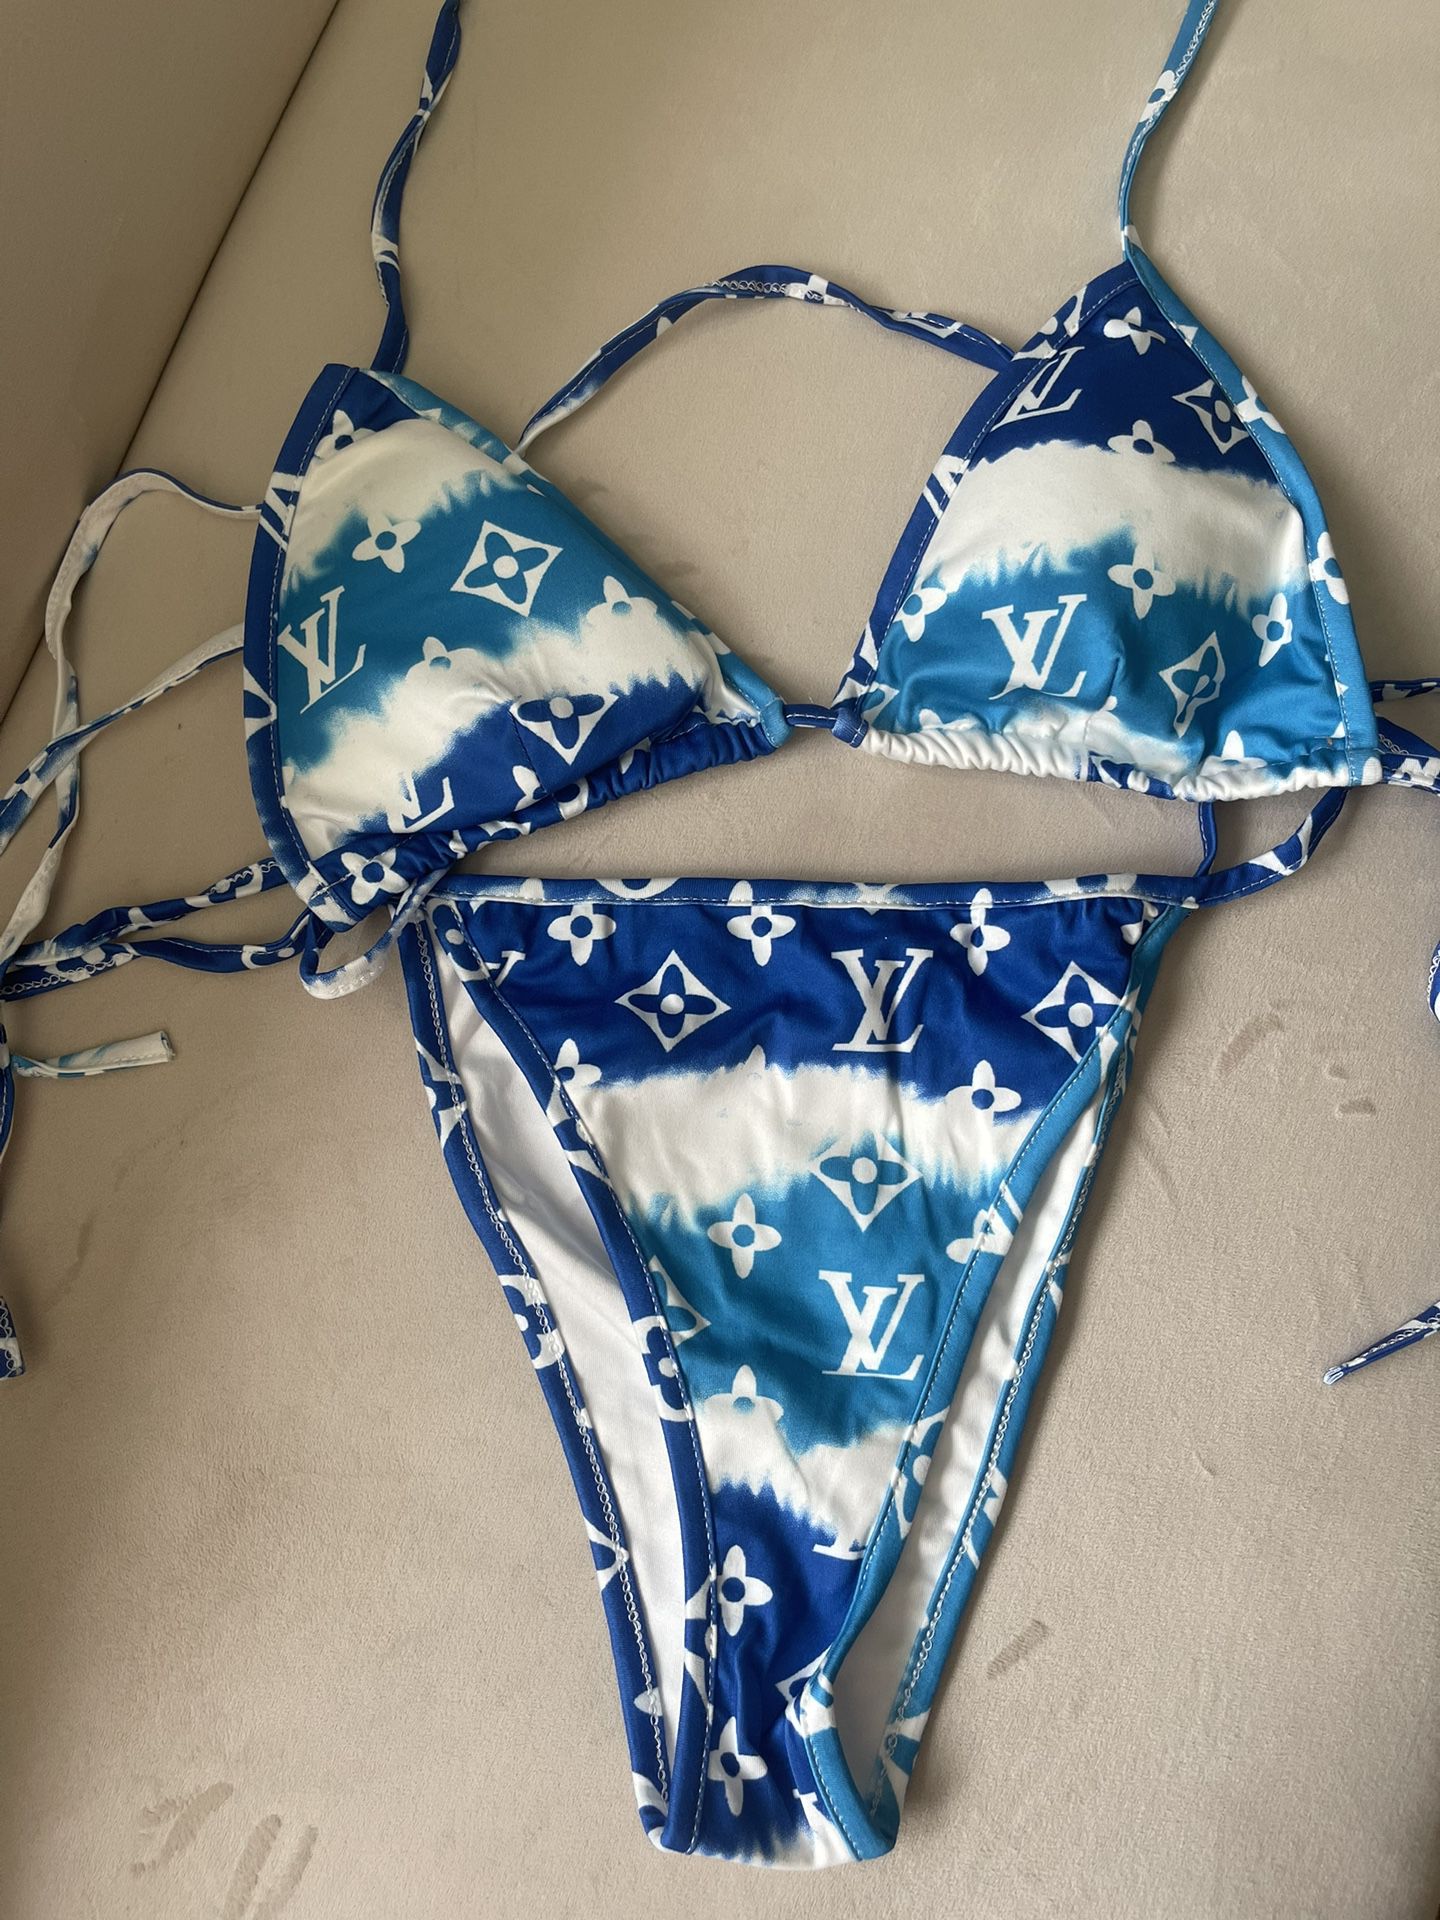 LV Swimsuit Size Medium Brand new for Sale in Fort Lauderdale, FL - OfferUp